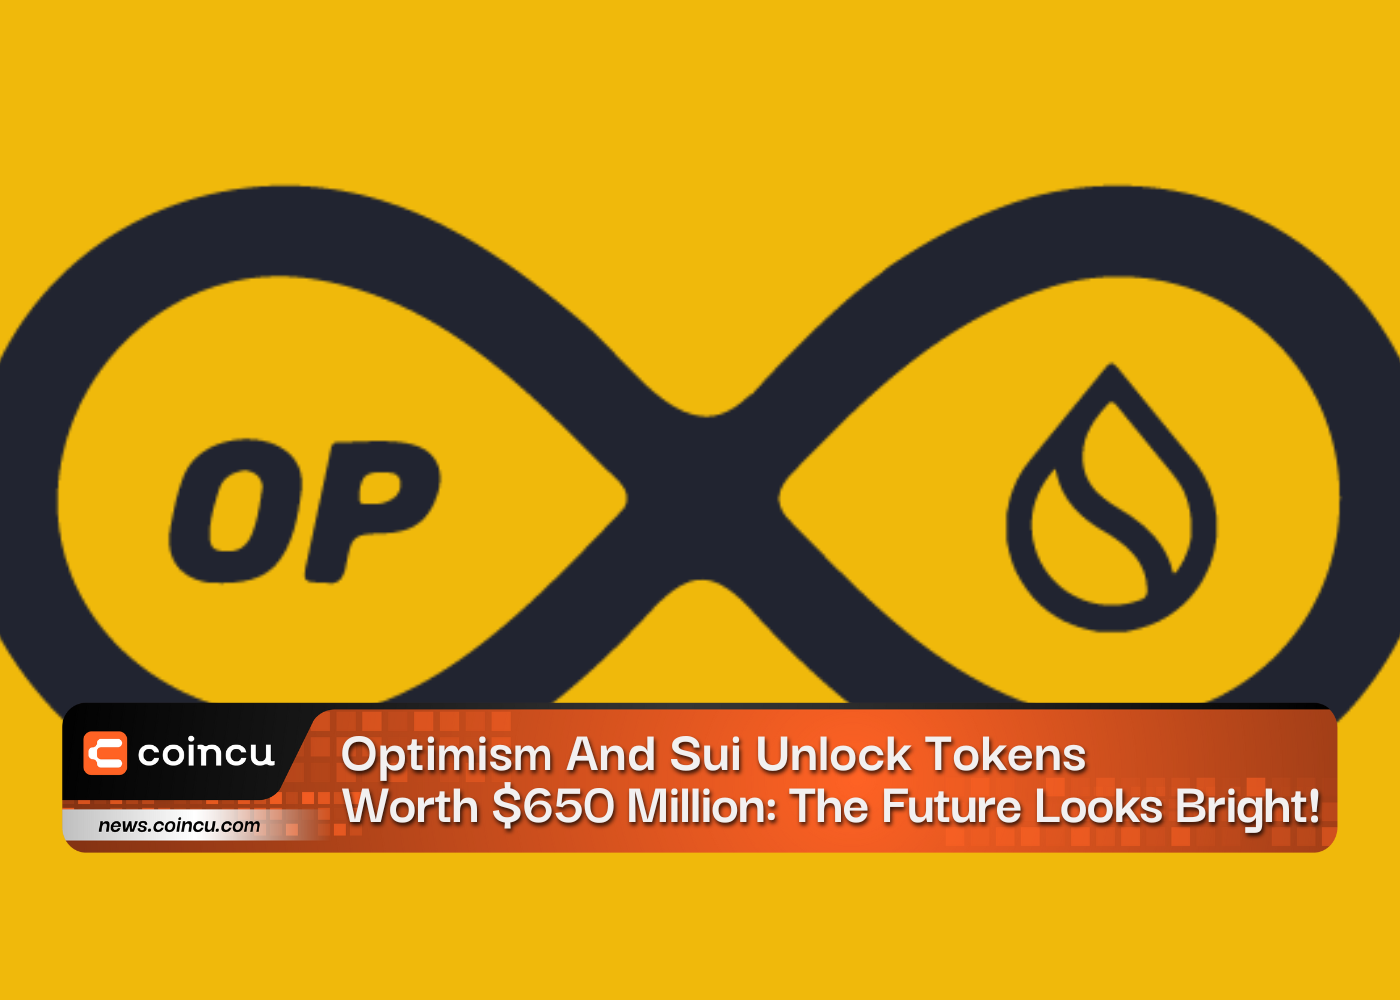 Optimism And Sui Unlock Tokens